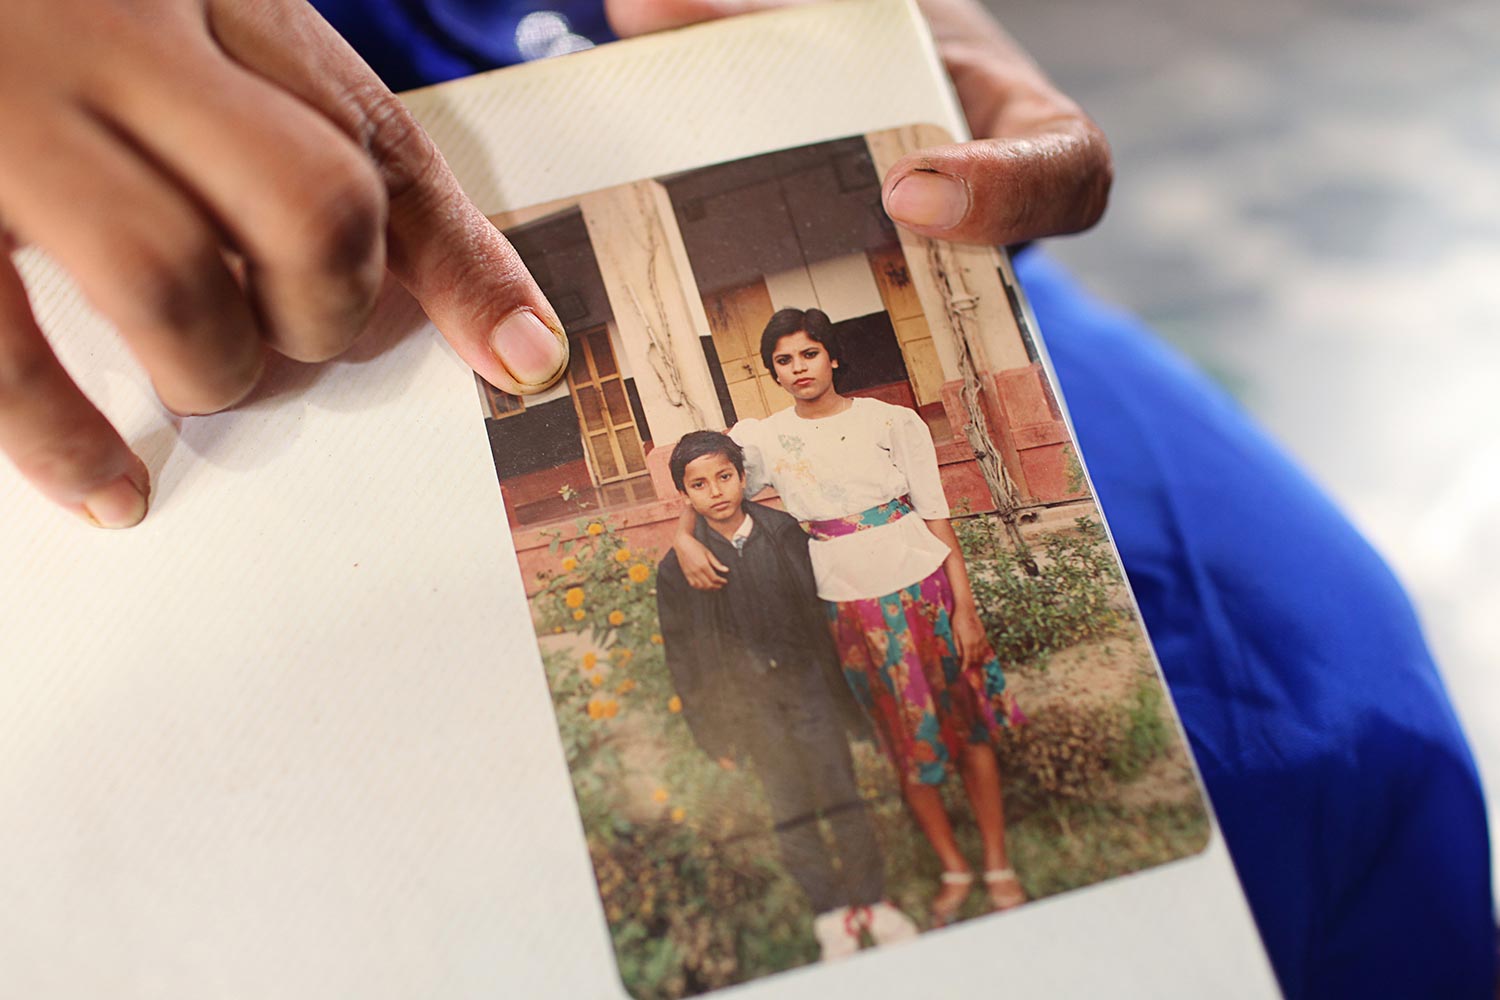 His older sister Bristi shows us a photograph from their childhood days. She constantly refers to him as the baby of the family, the intelligent student at school and the boy who loved football and cricket